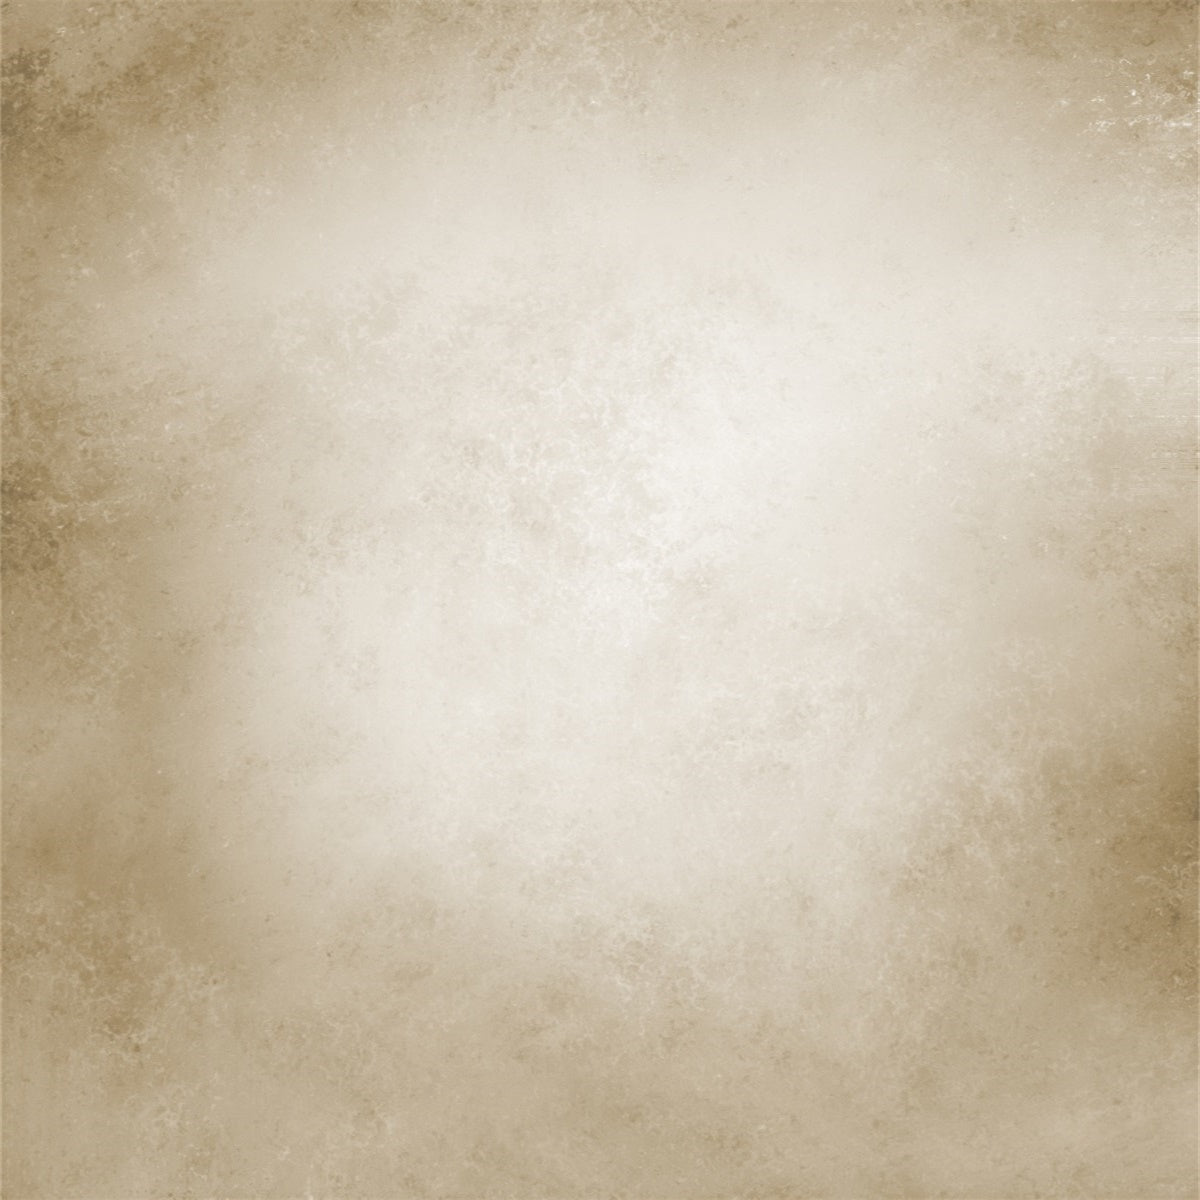 Light Brown Bright Abstract Photography Backdrops for Portrait